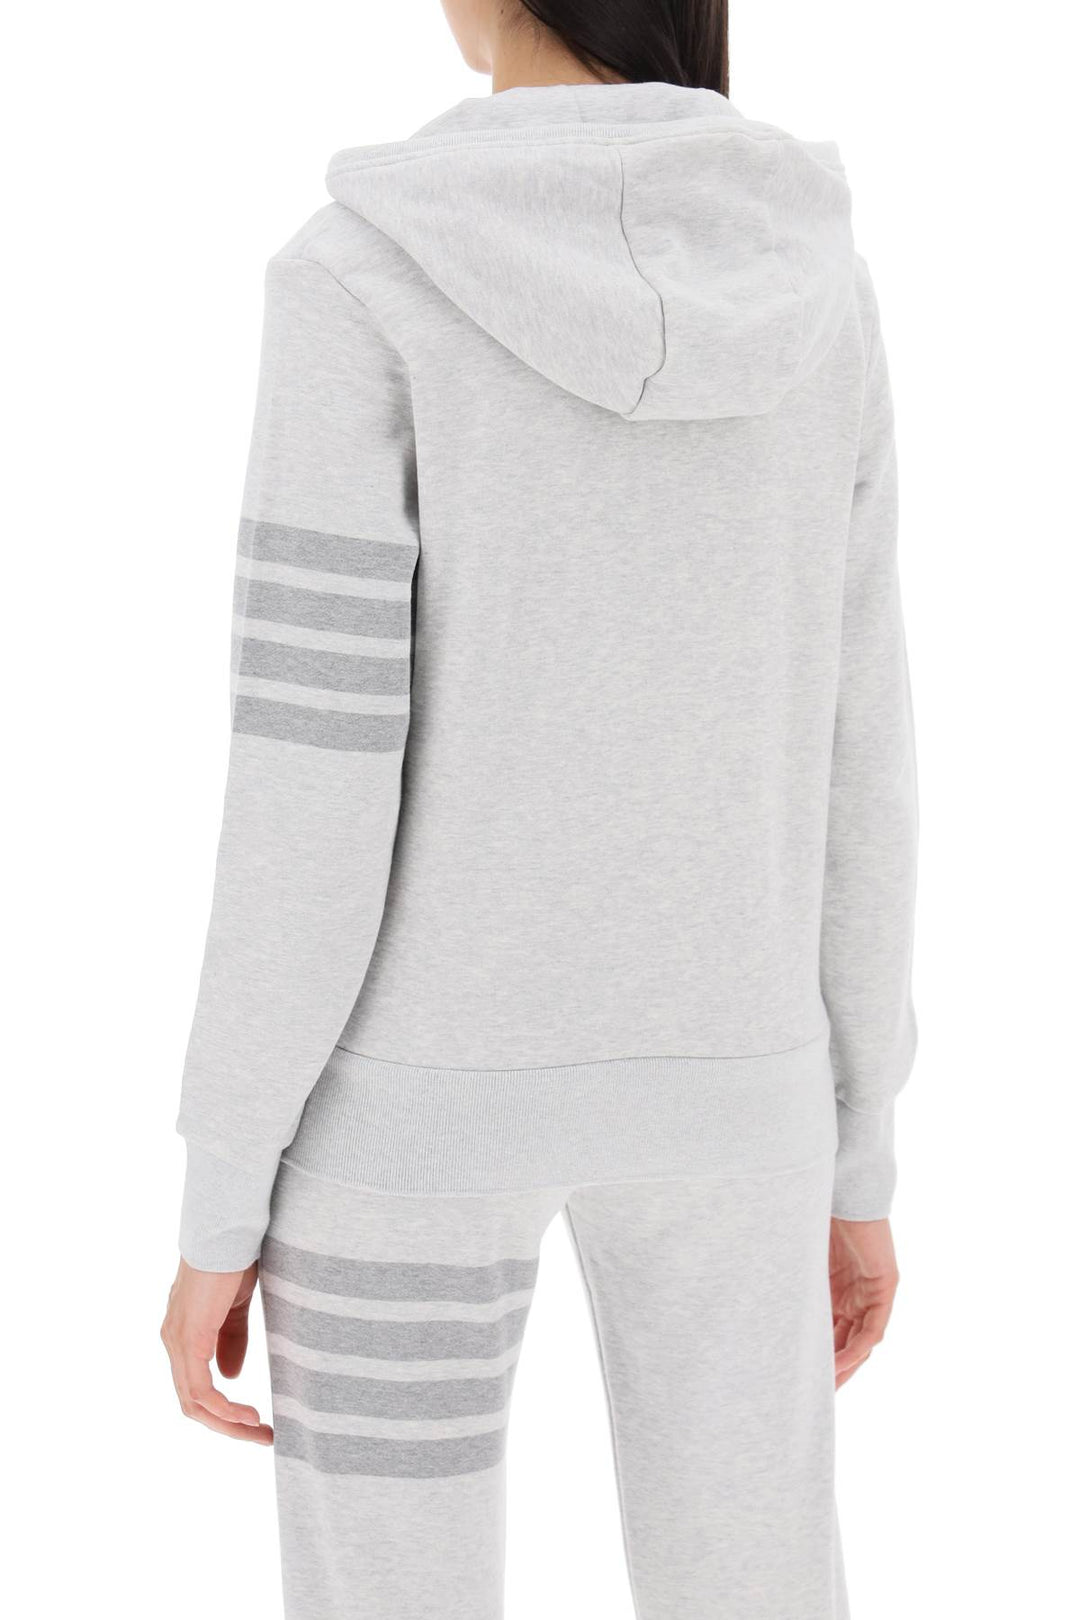 4-bar hoodie with zipper and-2